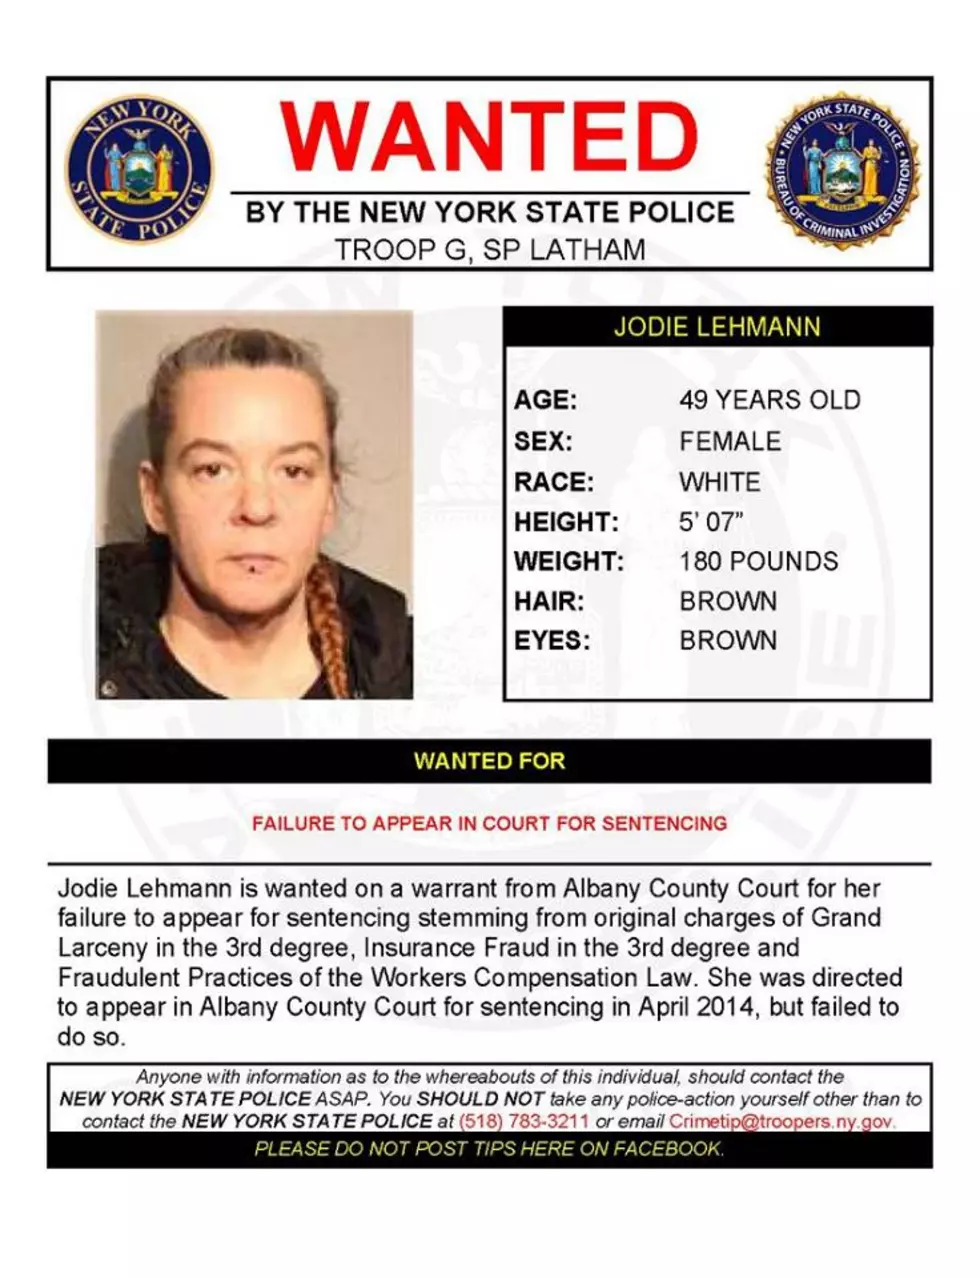 Warrant Wednesday: Hudson Valley Woman Wanted For Failure to Appear in Court For Sentencing